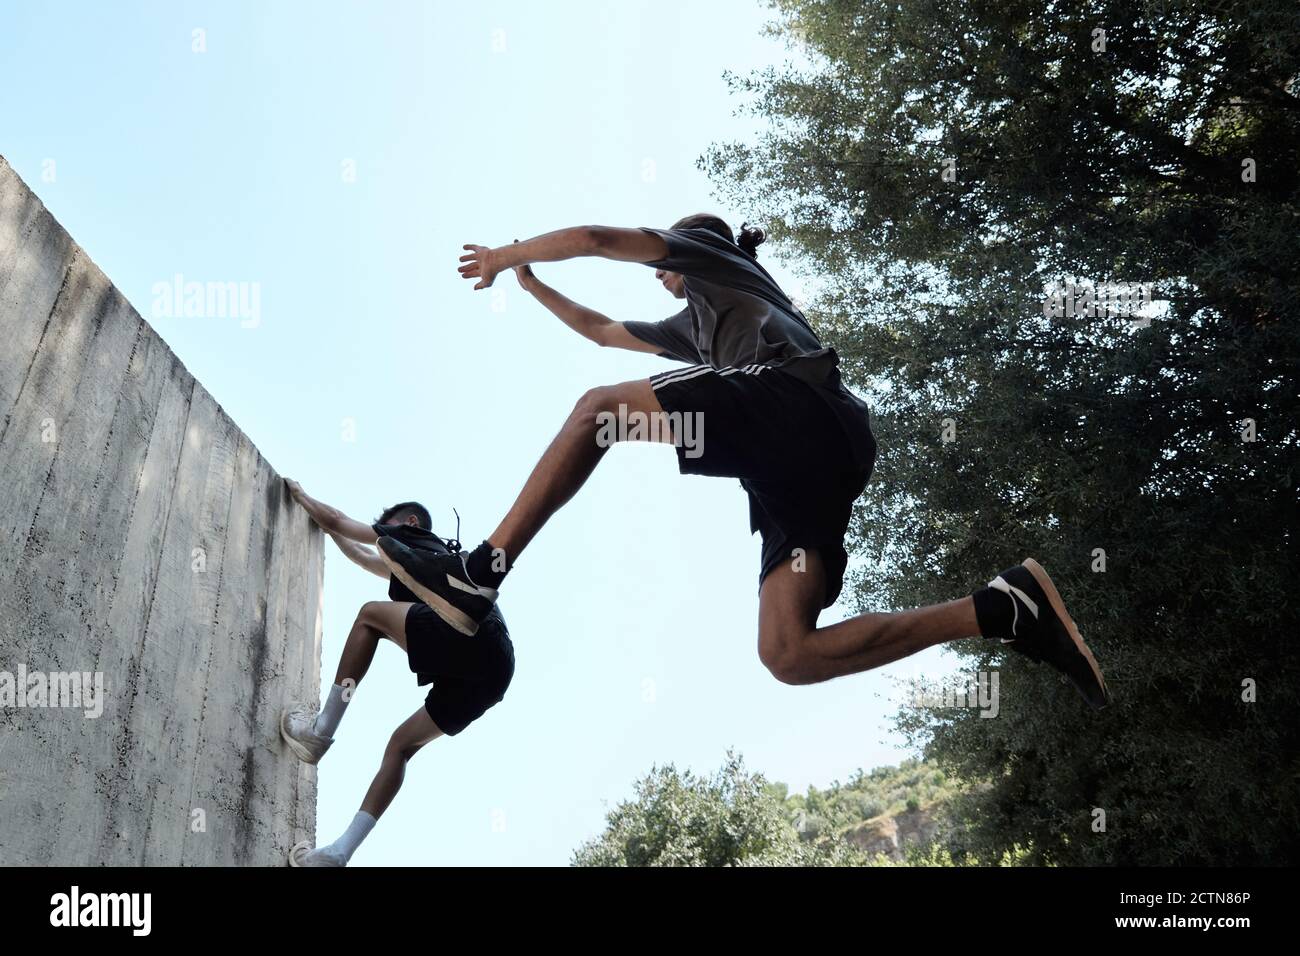 Low angle side view of unrecognizable strong men doing parkour and jumping above ground while performing dangerous trick Stock Photo